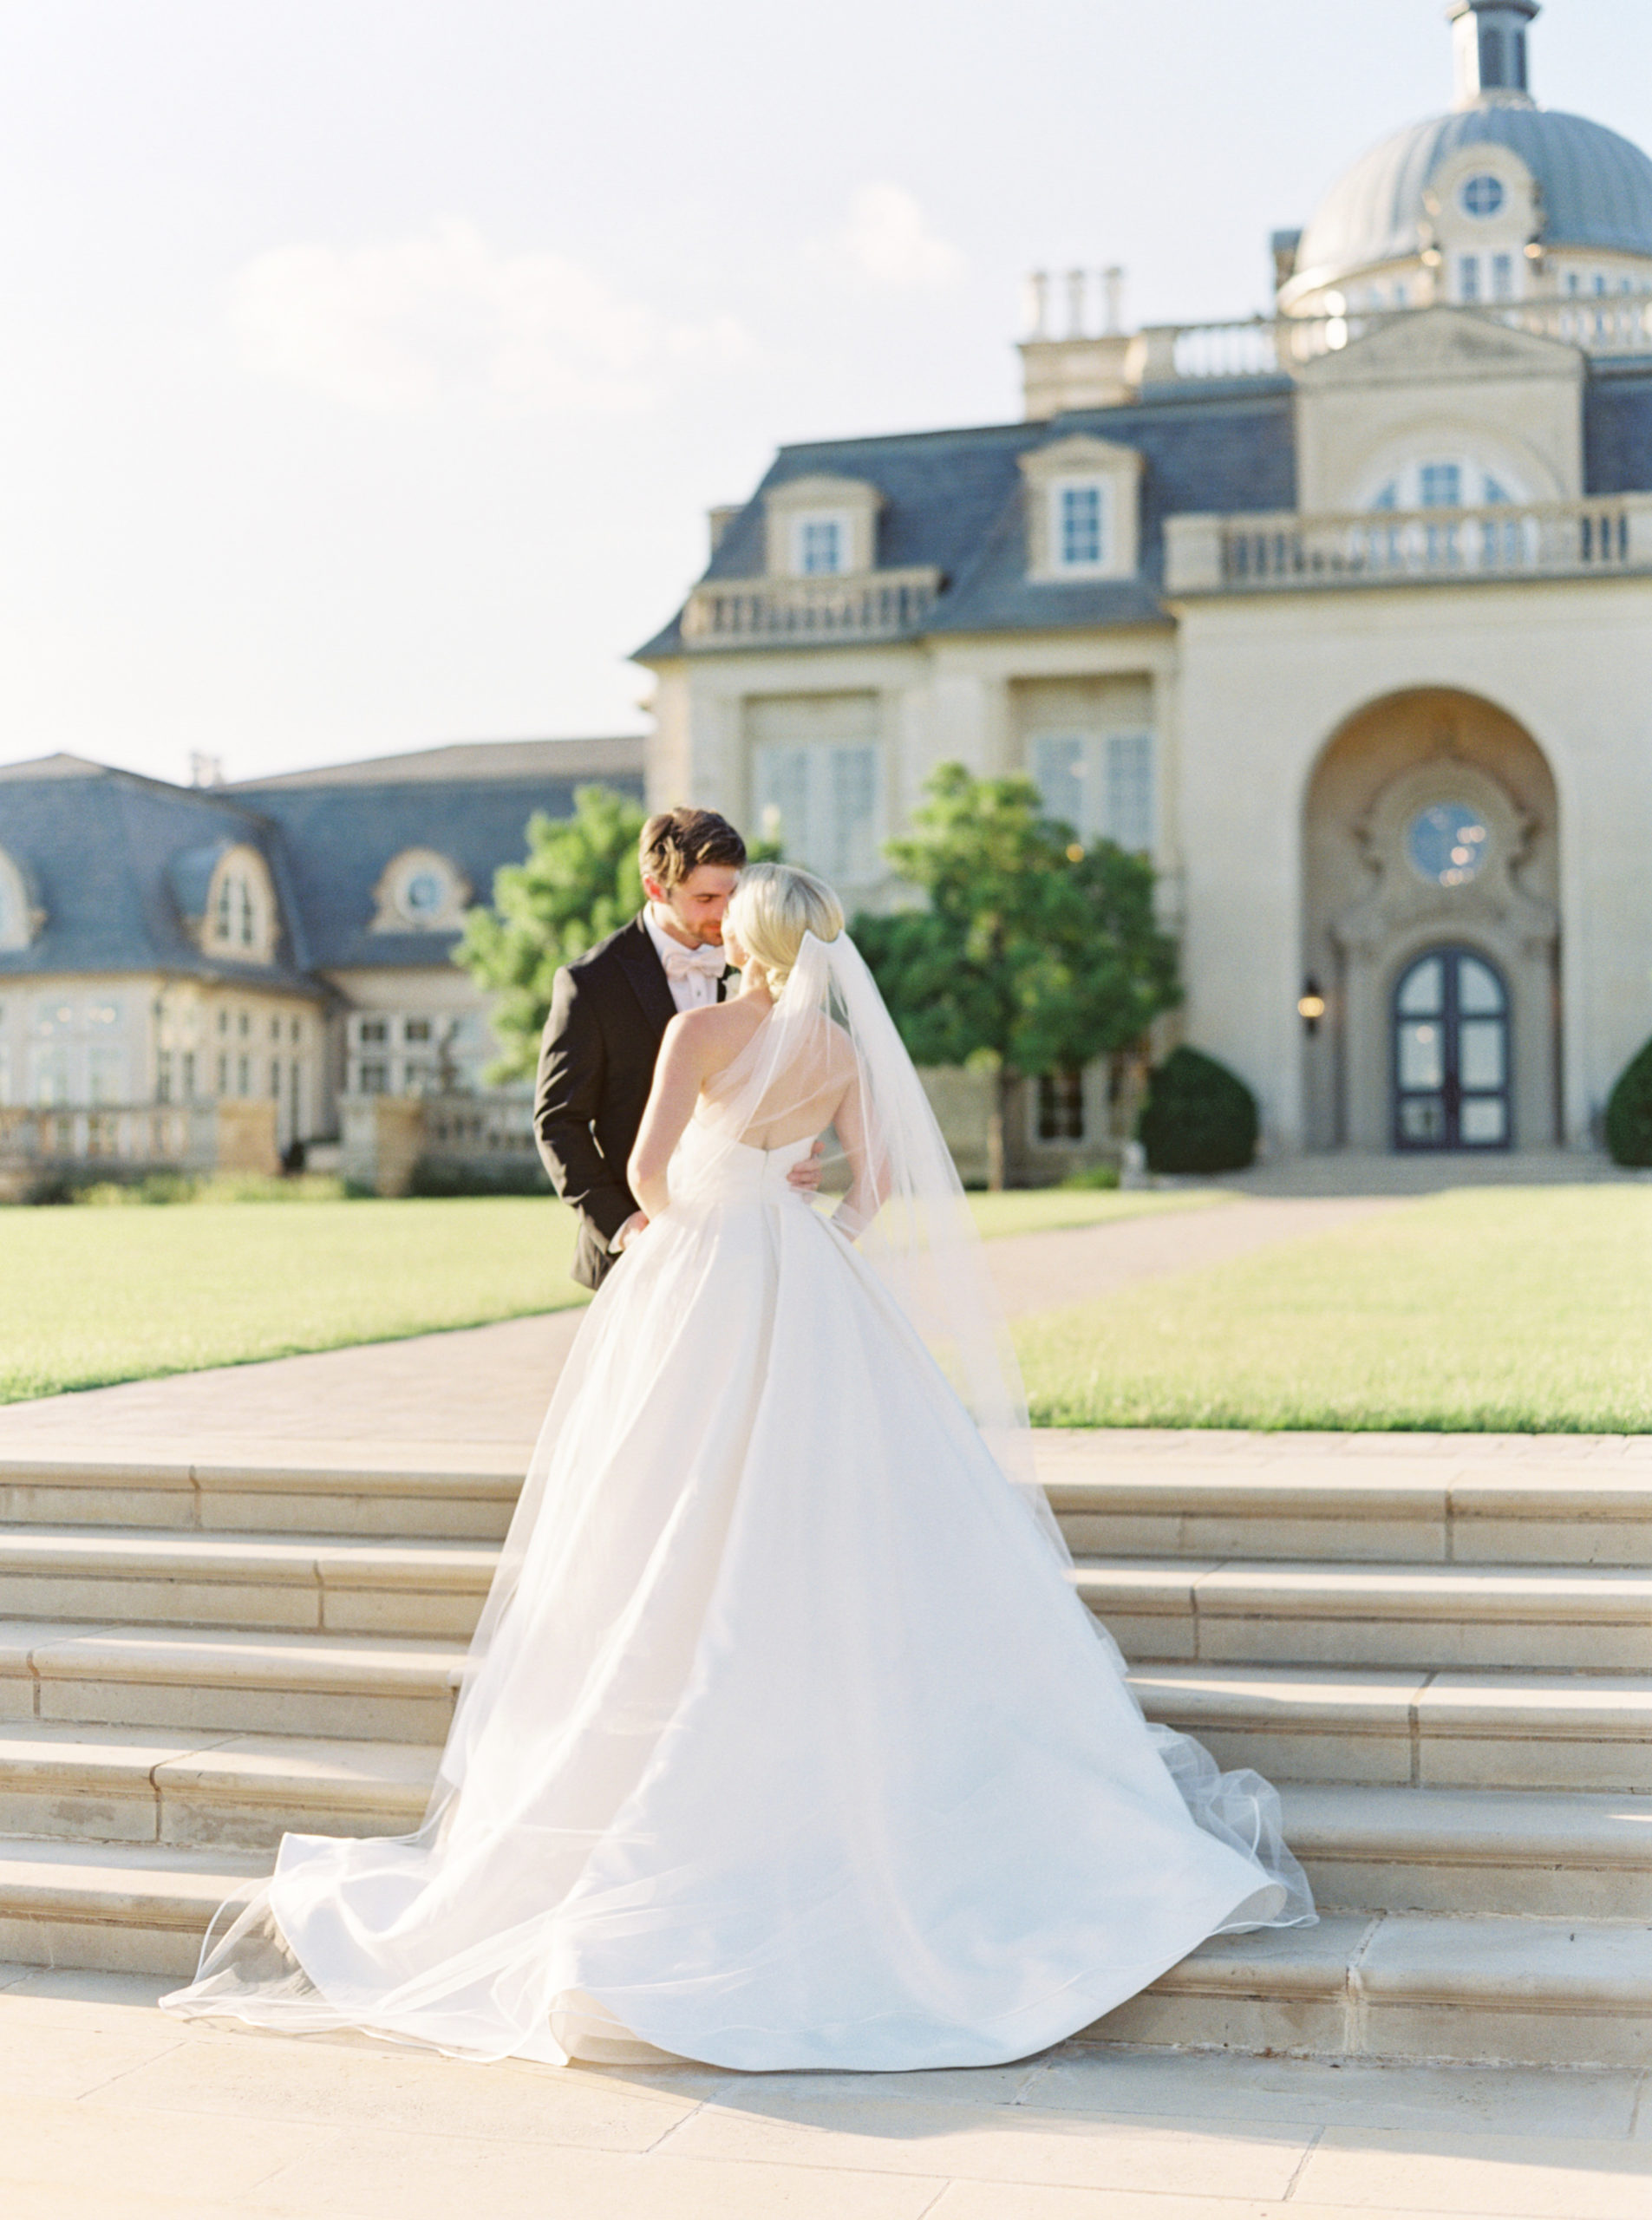 Bride and groom pose outside The Olana during their wedding shoot captured by Mackenzie Reiter